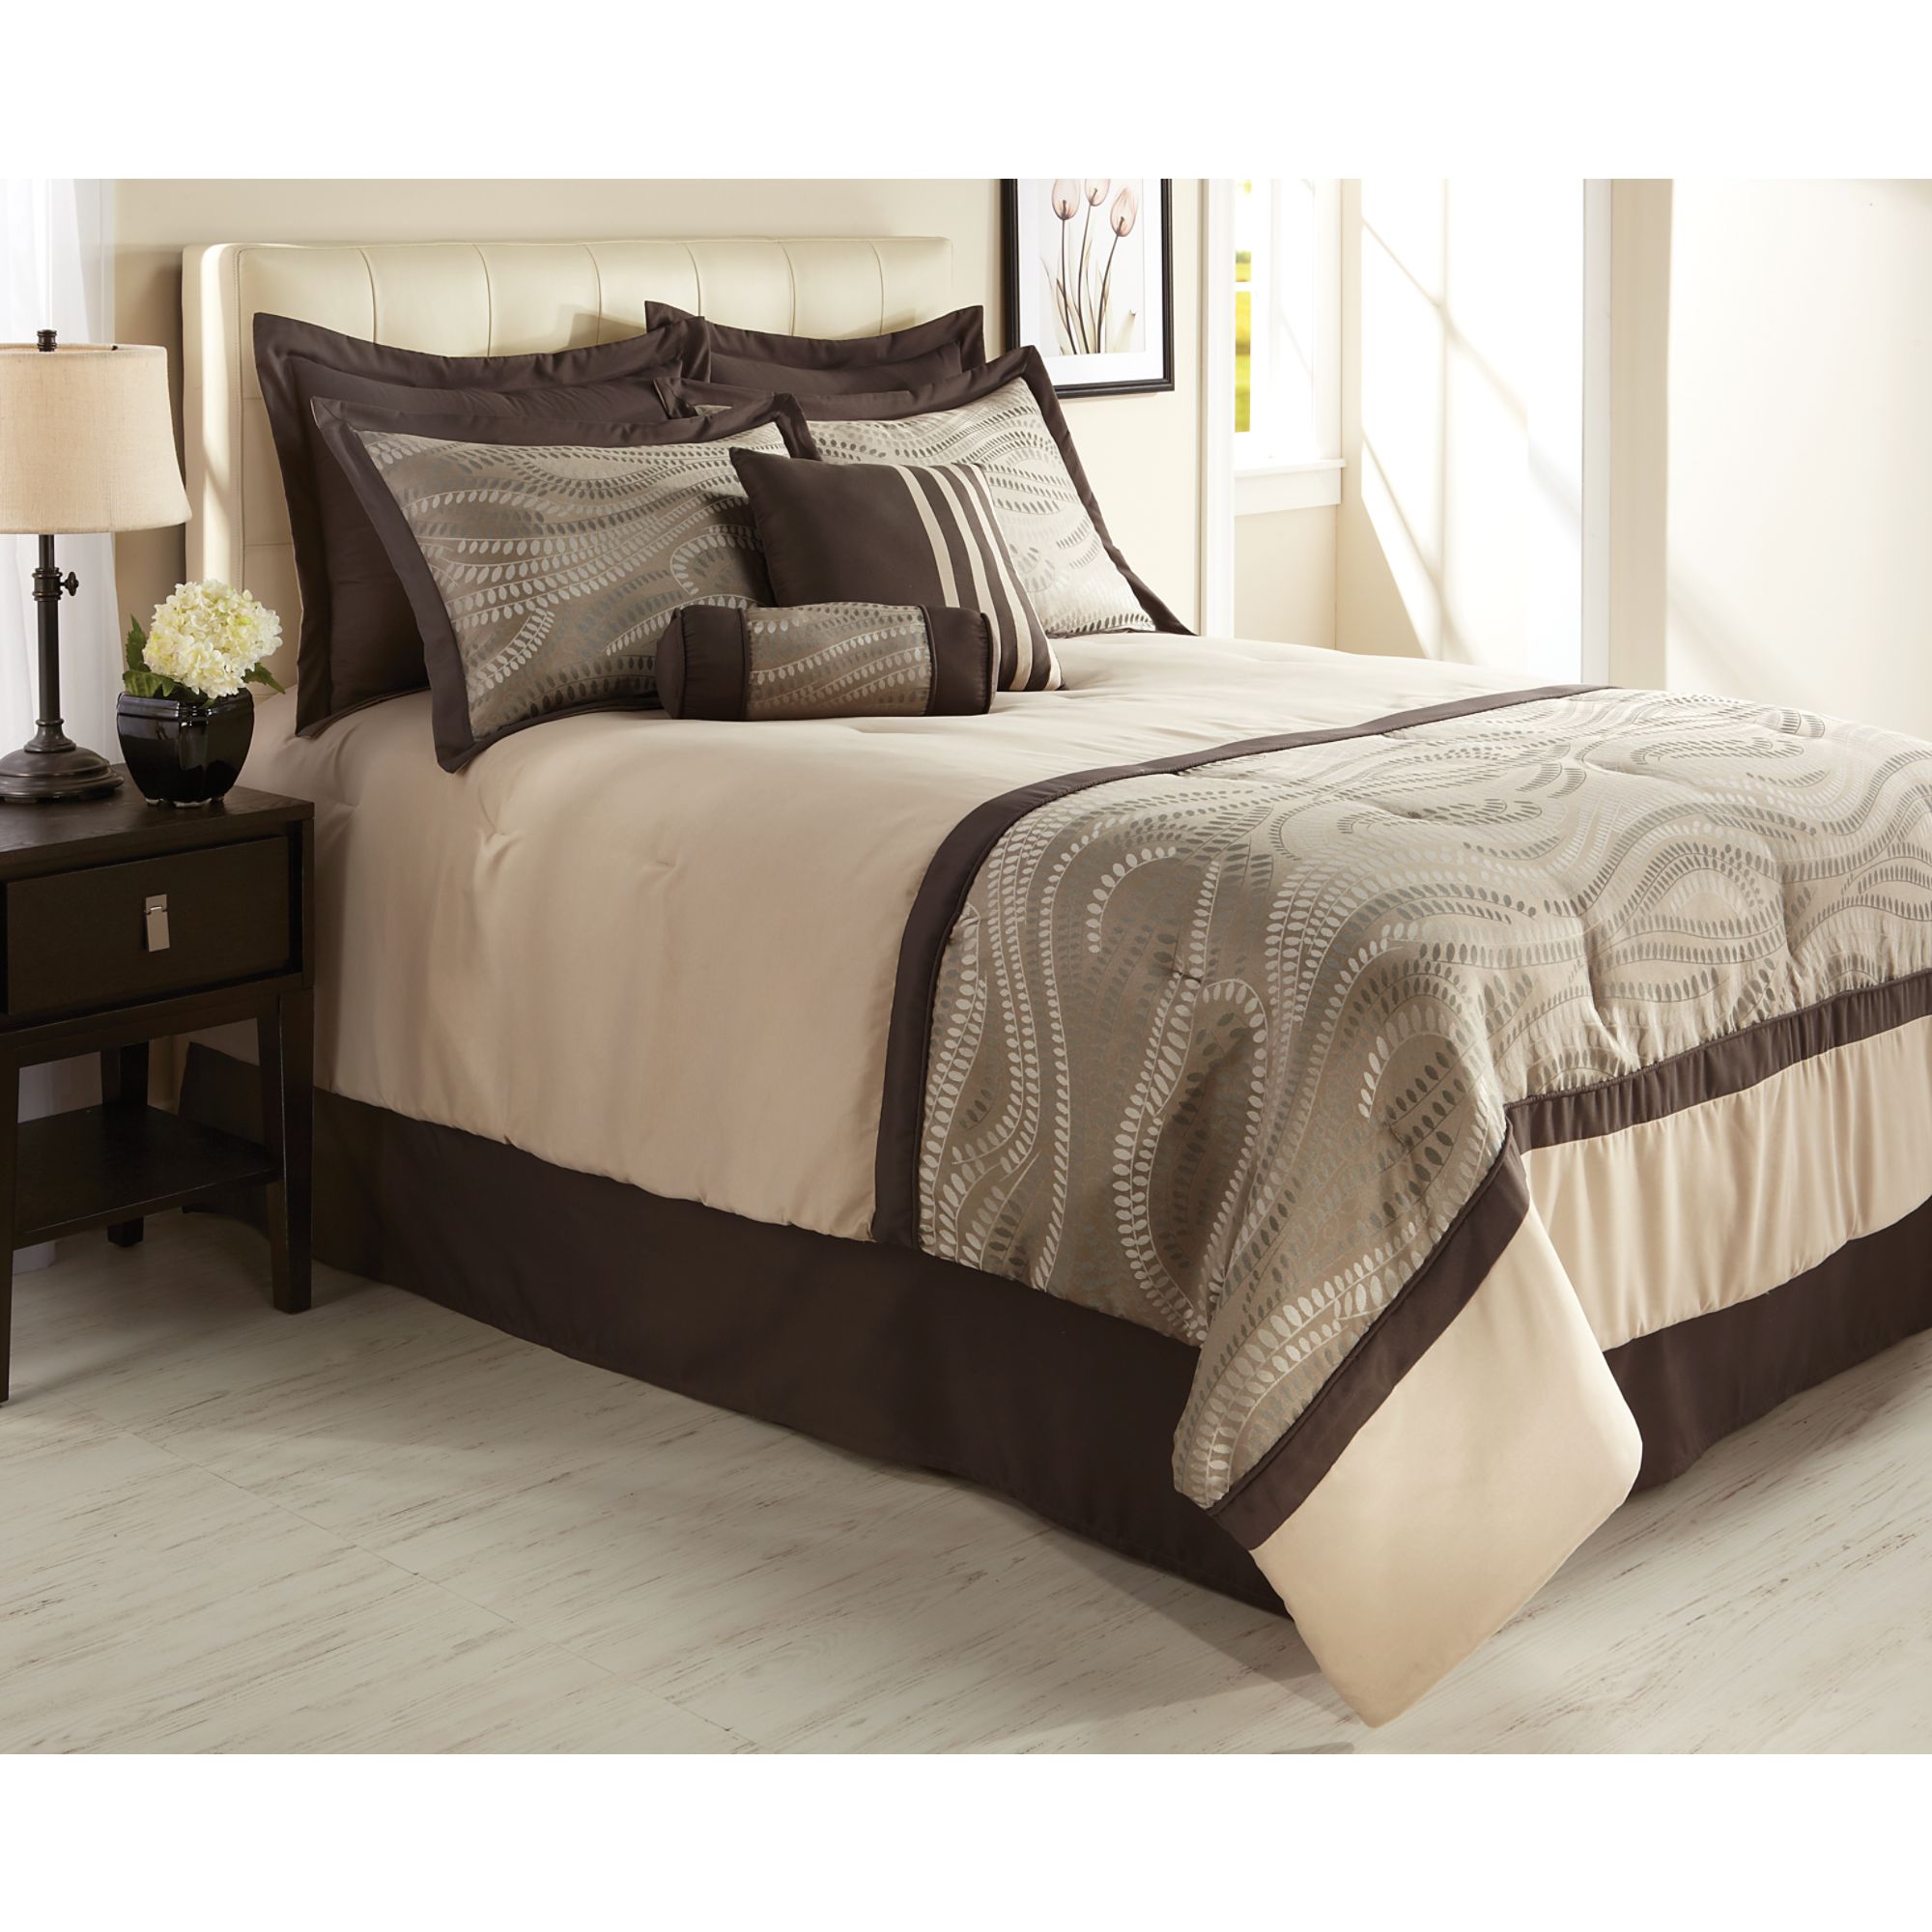 The Great Find Duval 8-Piece Complete Bed Set